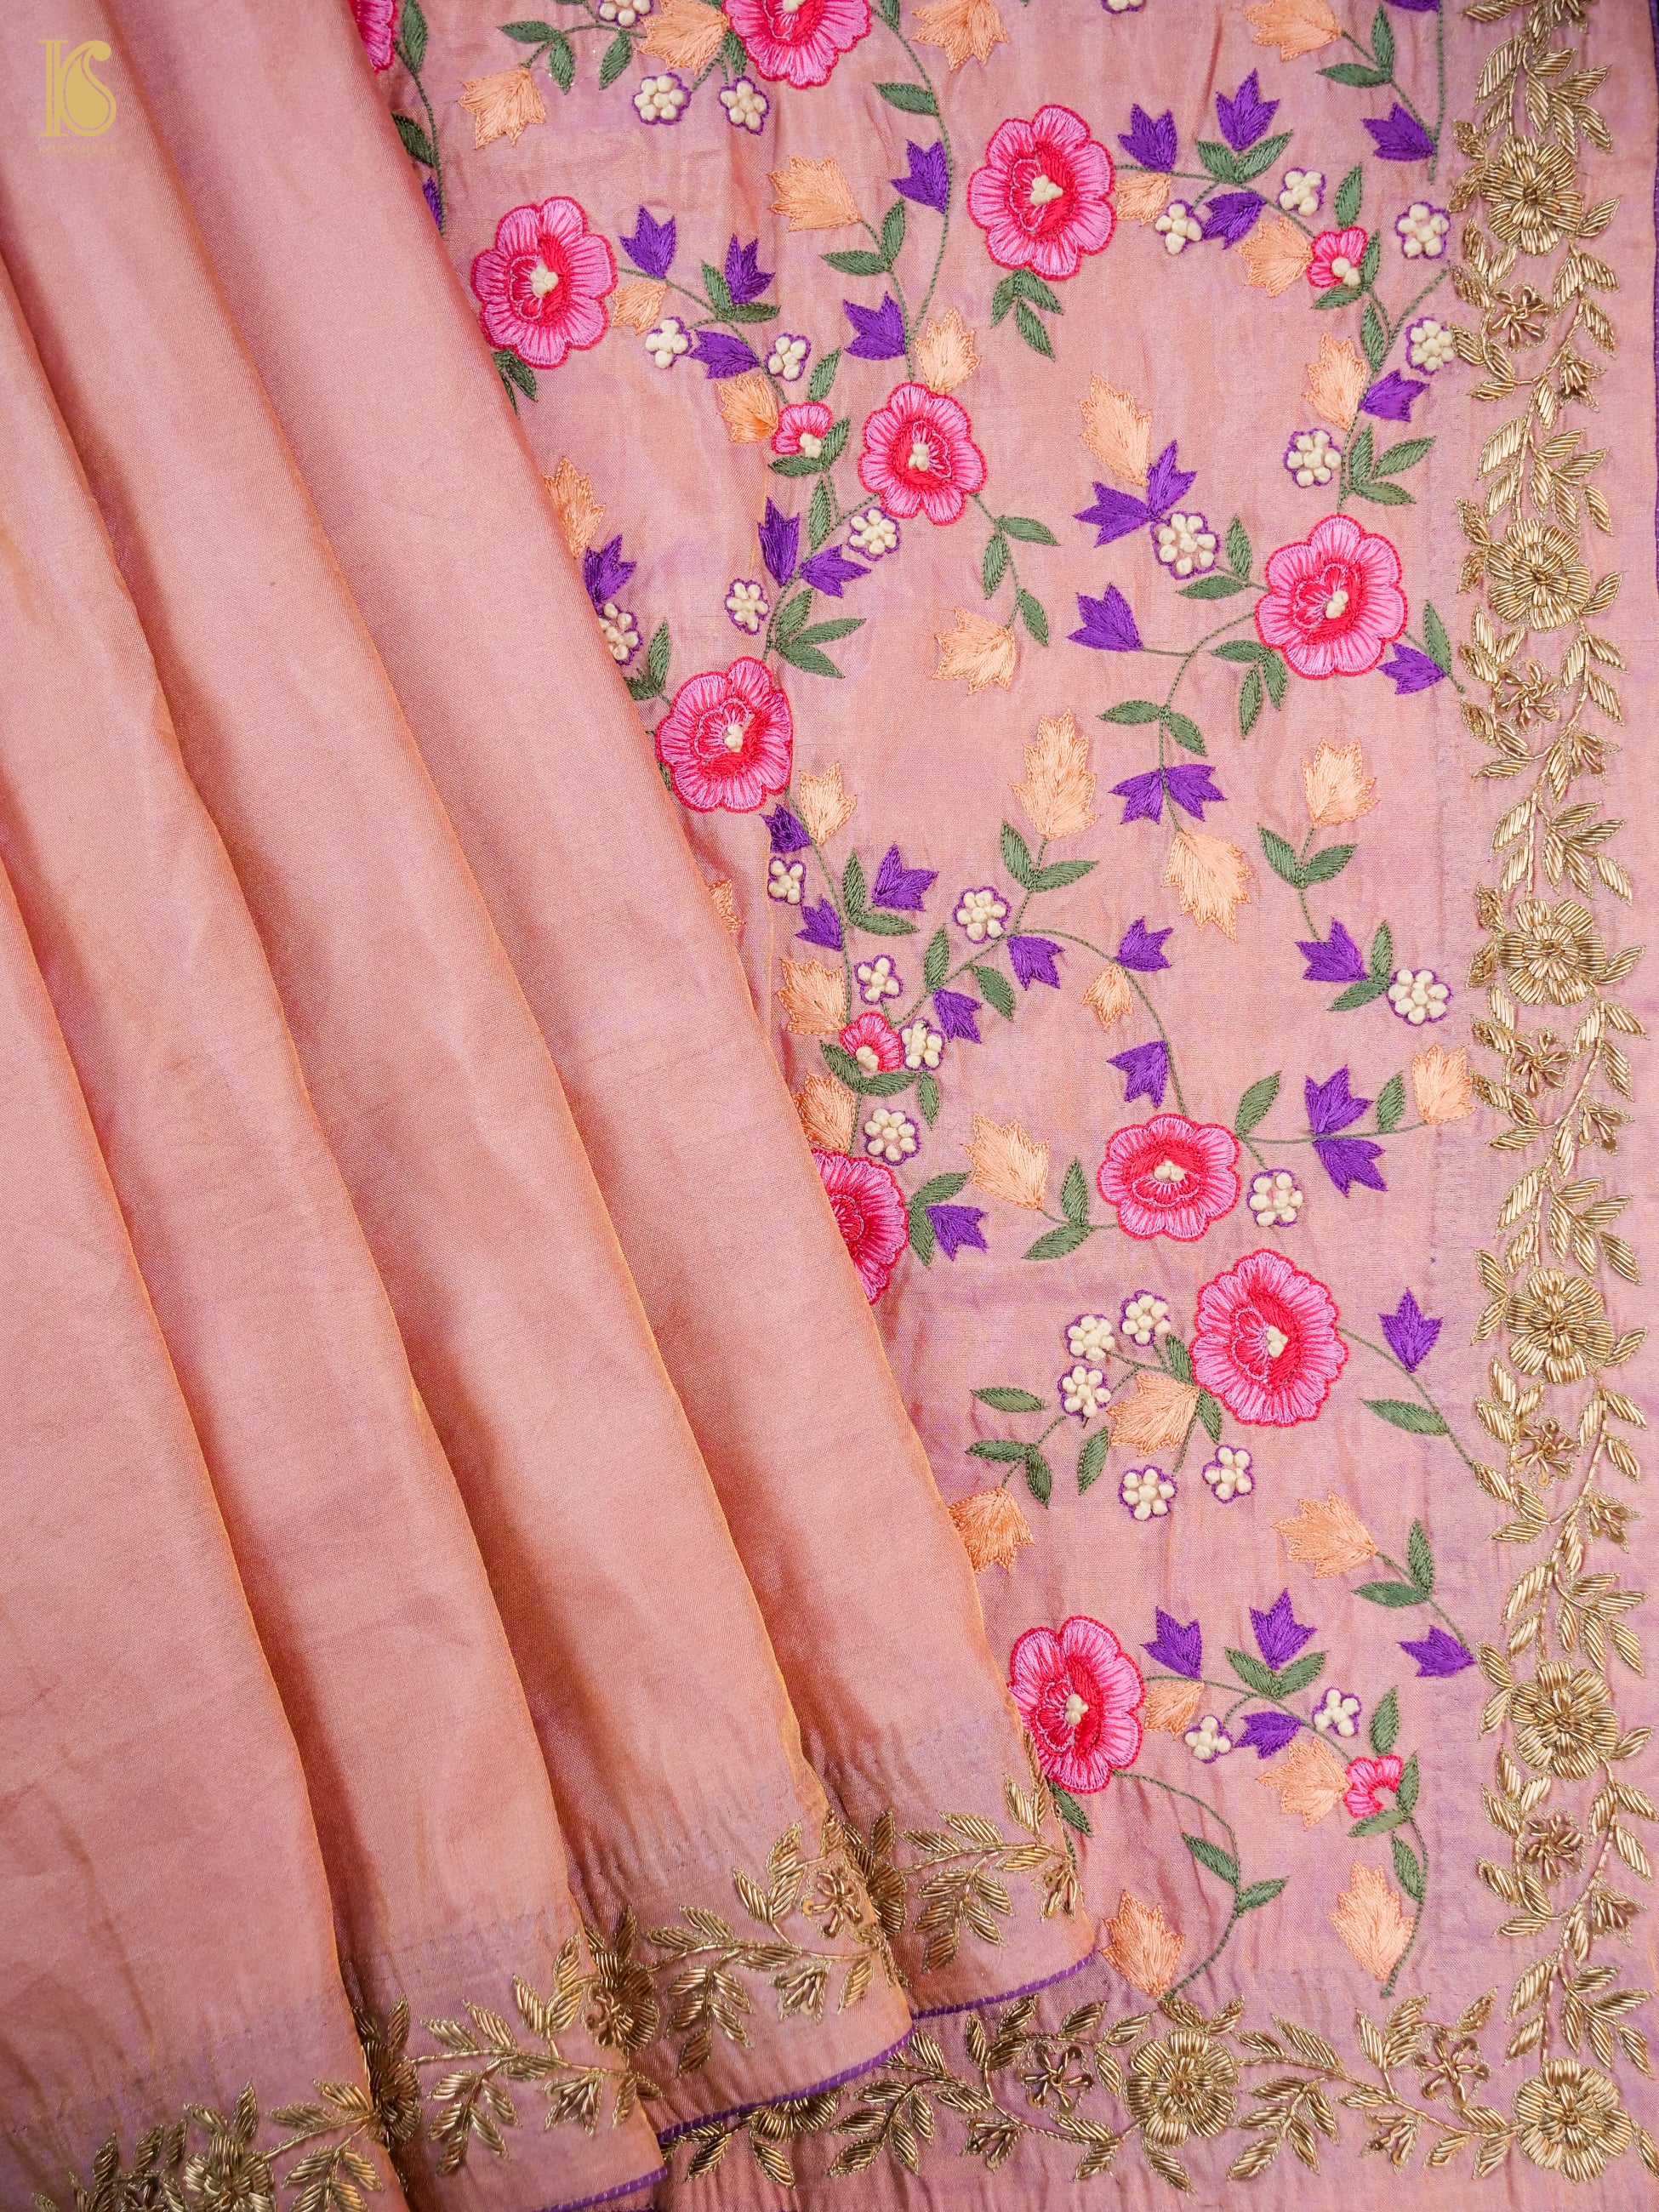 How to care for and maintain the embroidery on sarees over time - Quora